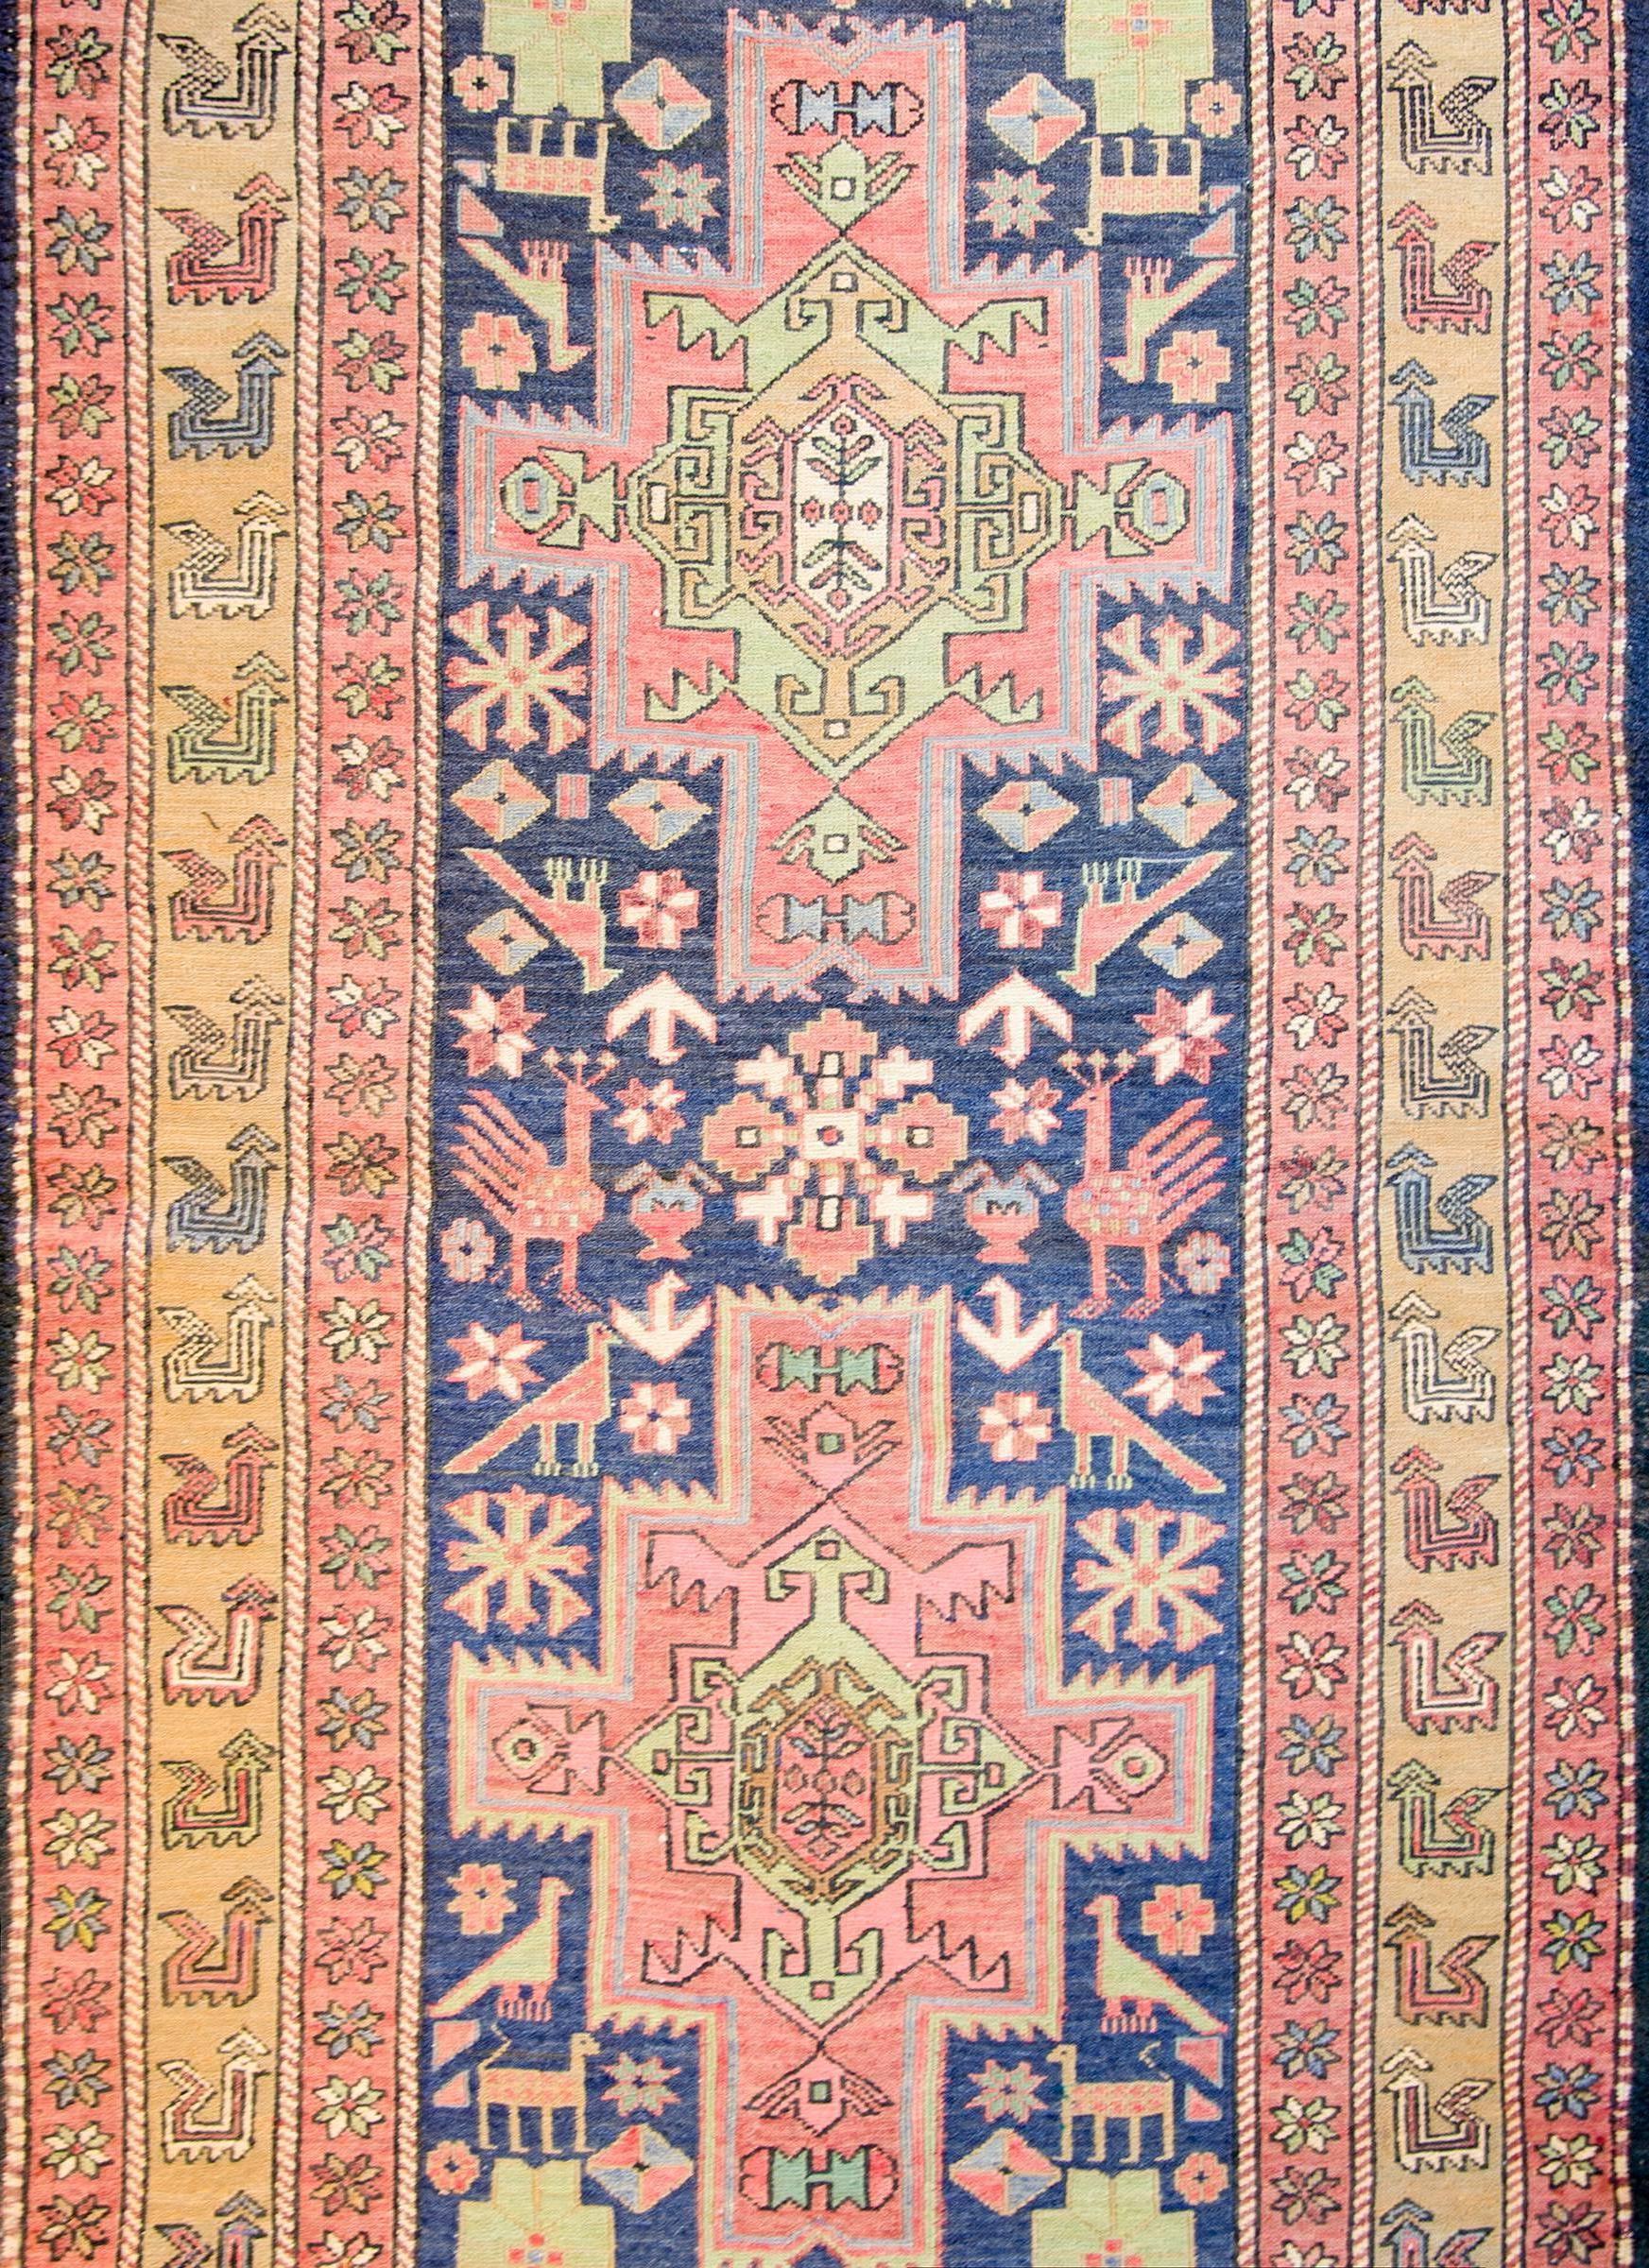 A wonderful late 19th century Persian Sumak Azeri rug with four large medallions depicting stylized flowers, amidst a field of tightly woven goats, chickens, birds, and strangely enough, stop signs, all on an indigo border. The border contains a